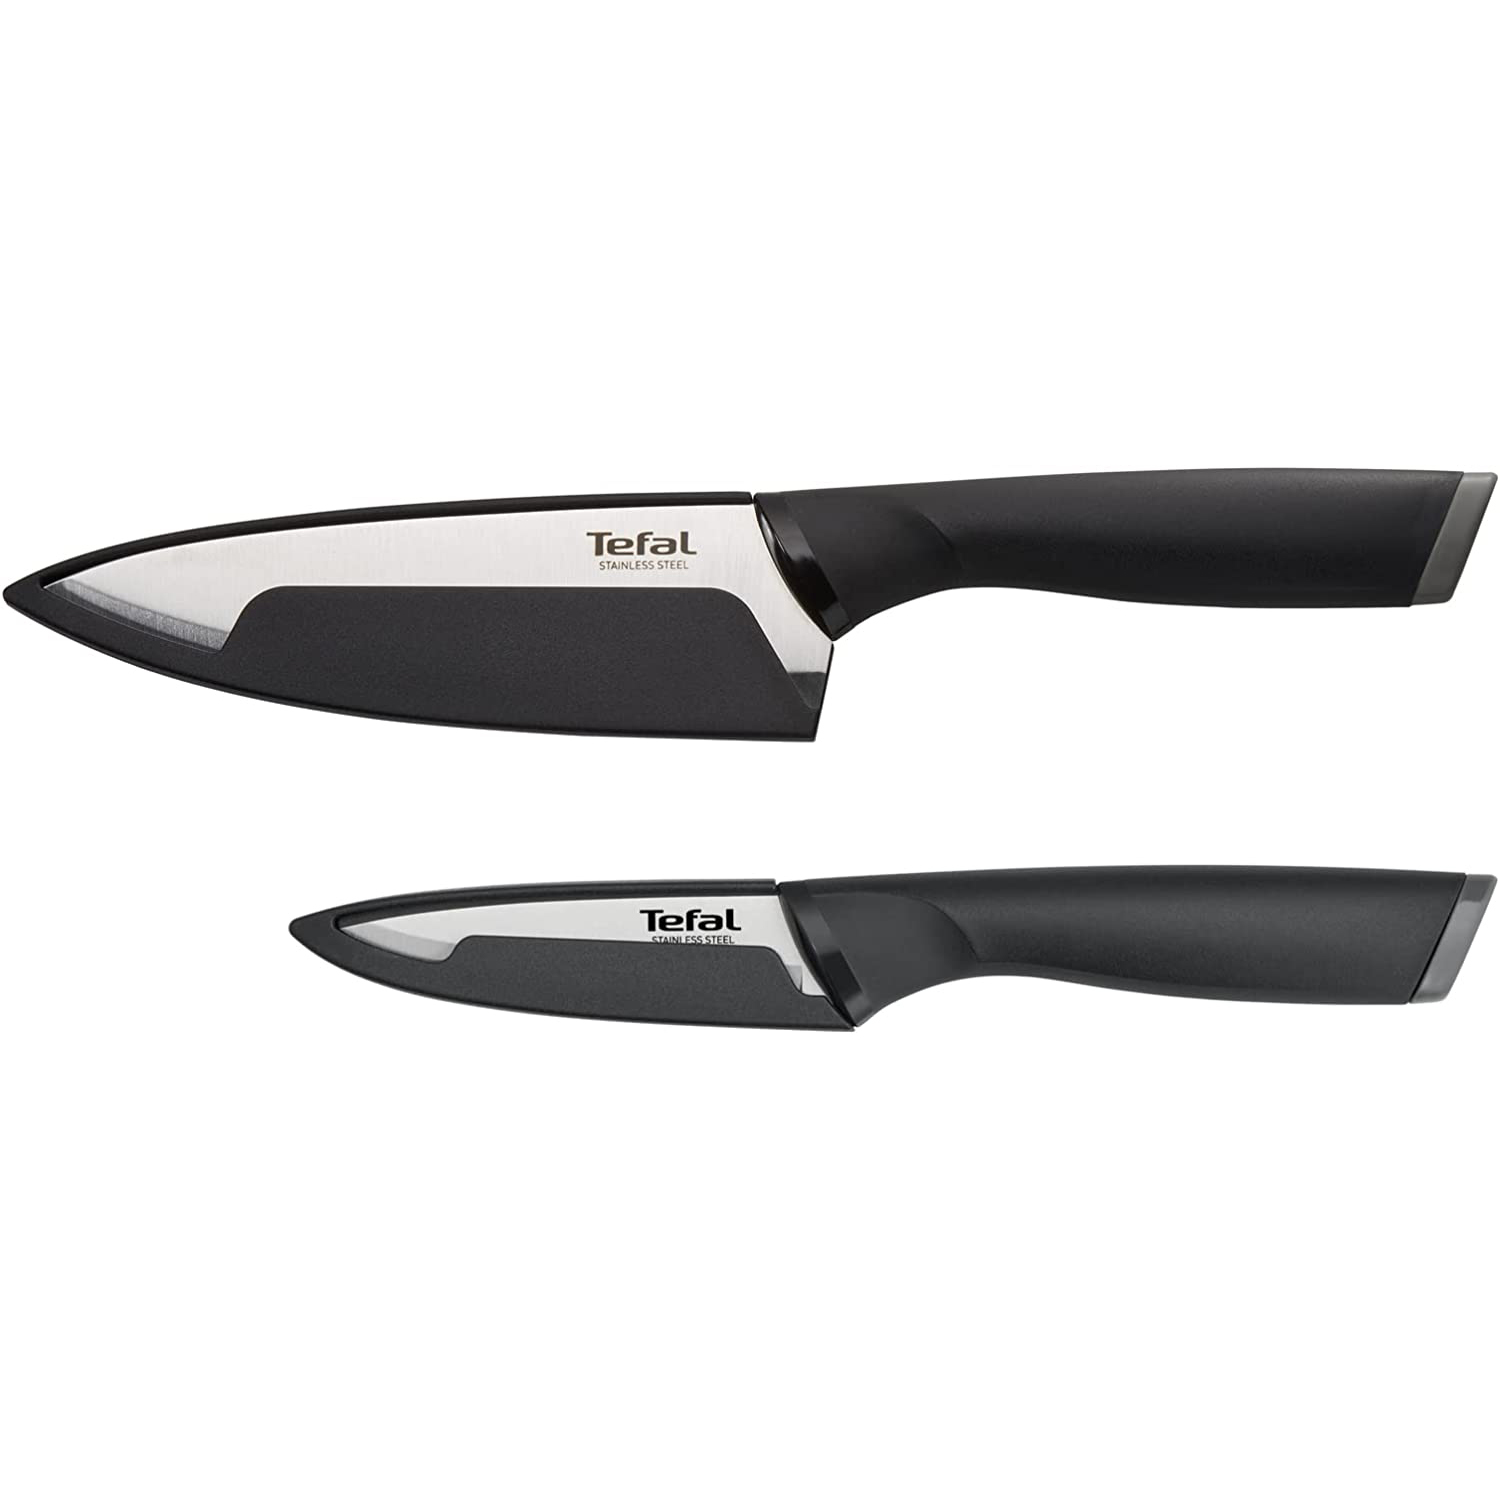 TEFAL Comfort Stainless Steel Knife 2p Paring 3.5"/9cm + Chef 5.9"/15cm Silver - $39.37